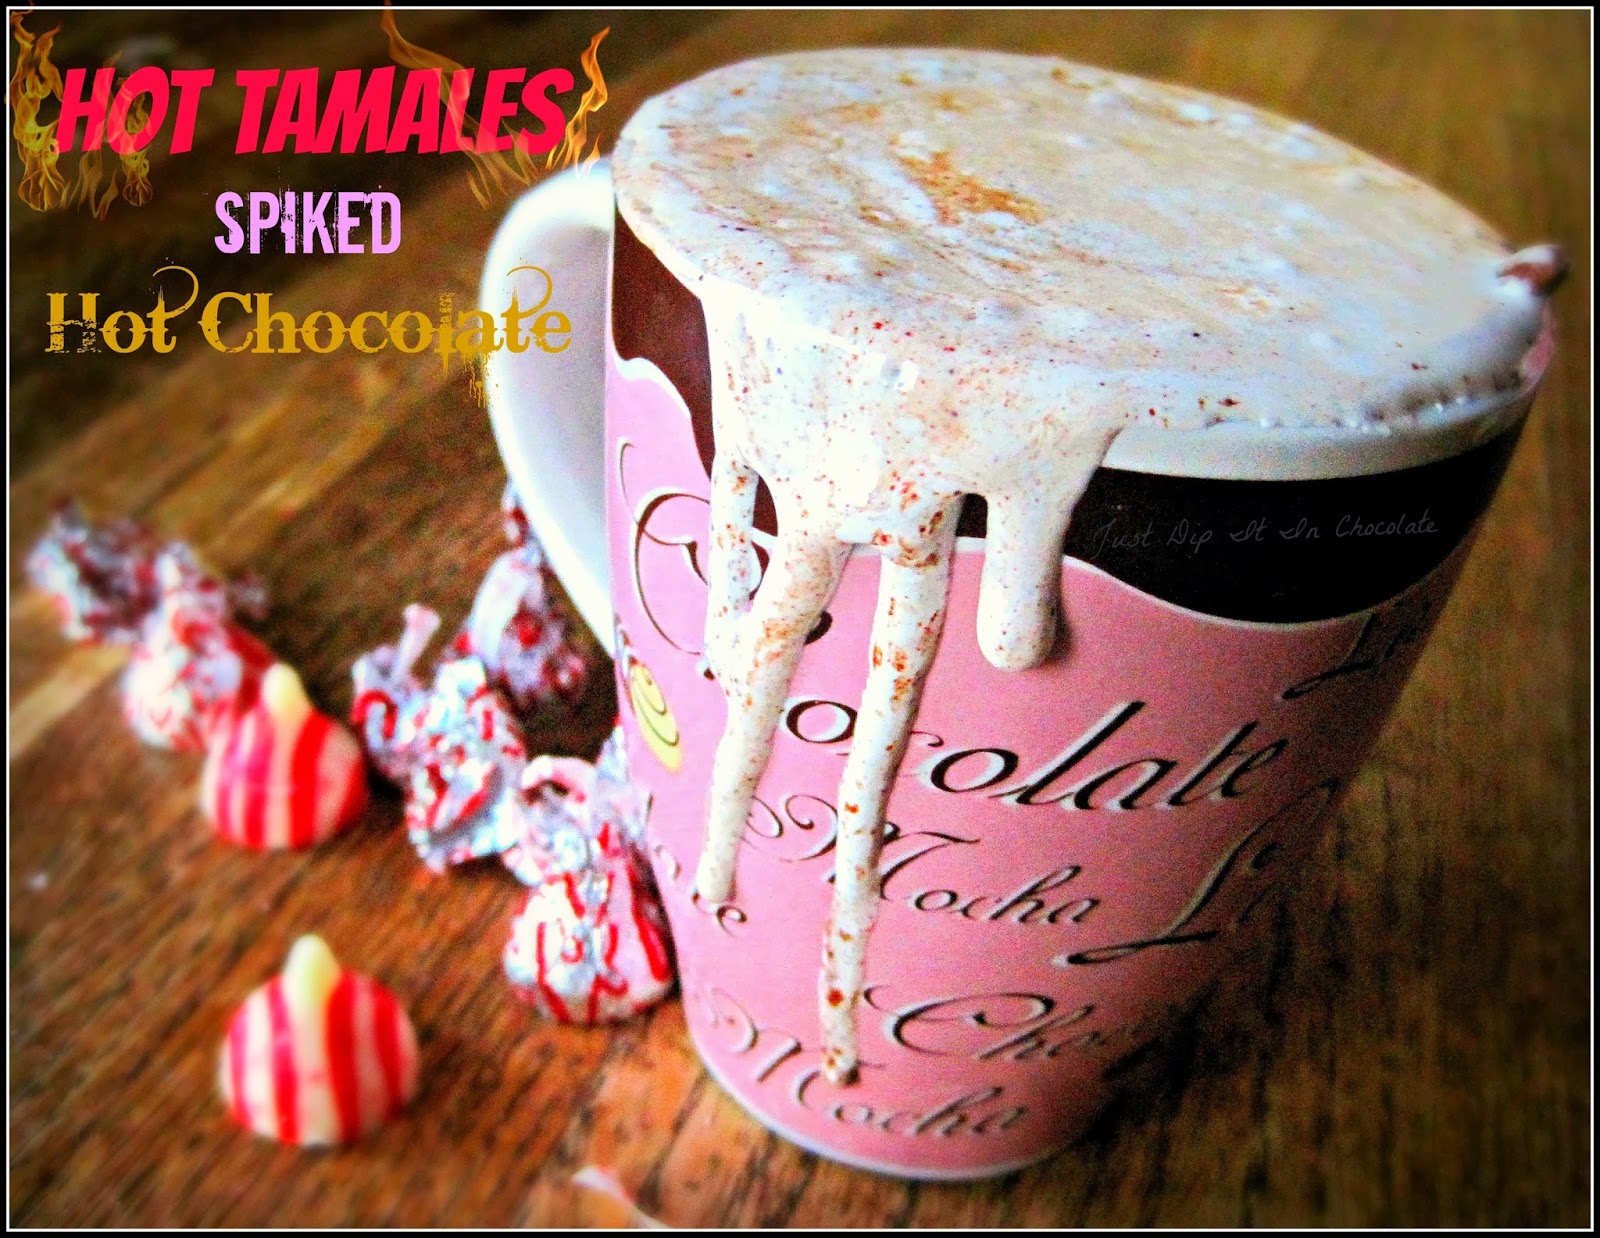 Hot Tamales Spiked Hot Chocolate Recipe, If you love the candy you are sure to Love this hot, spicy and sweet 'Adult" hot chocolate version!